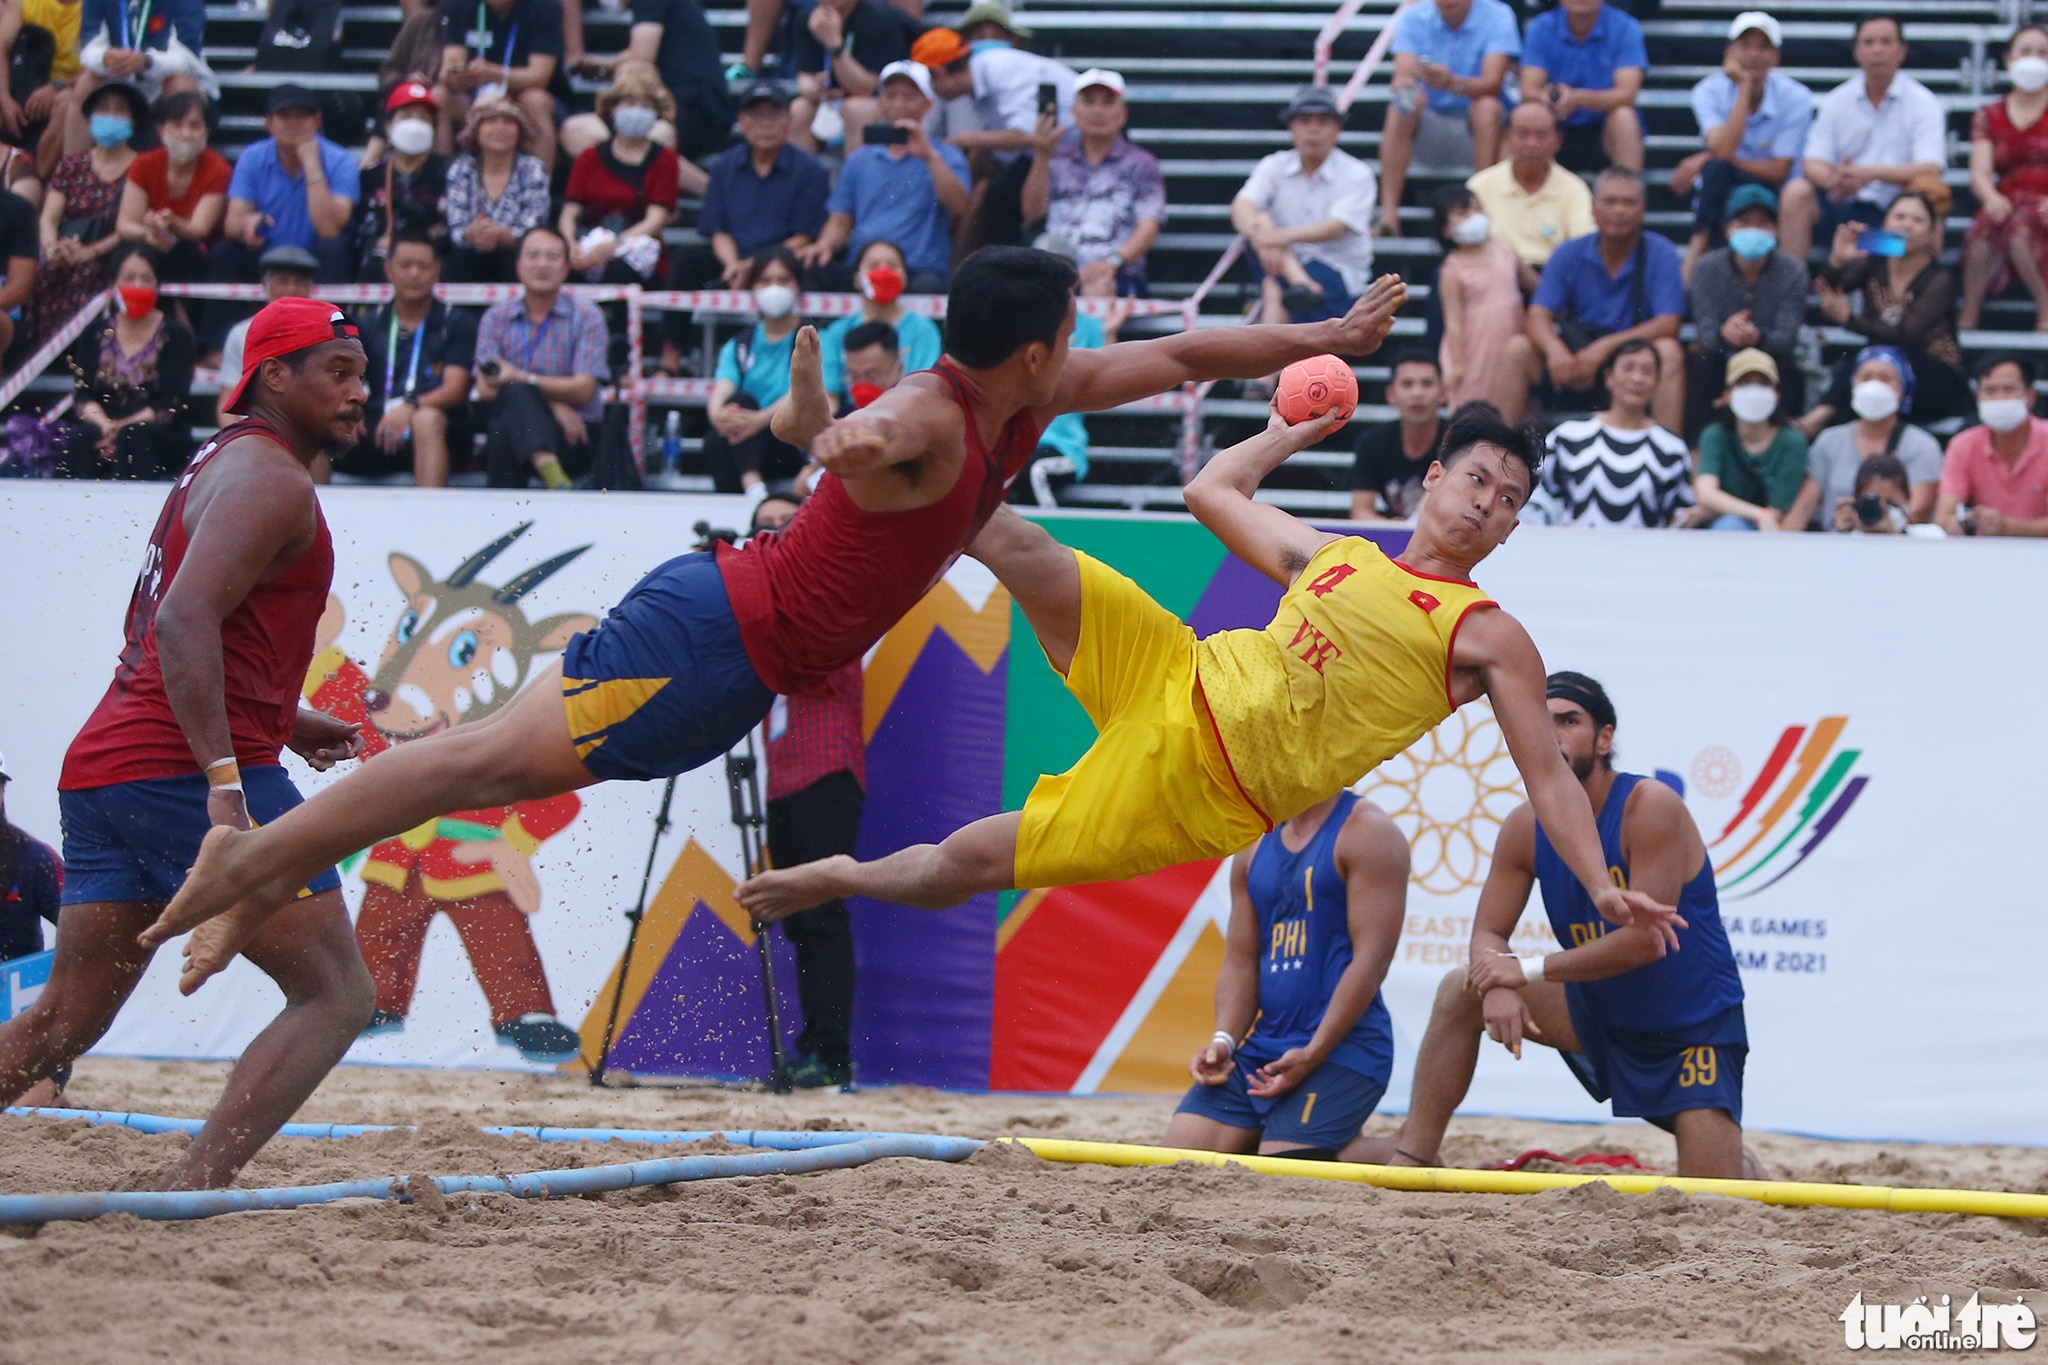 Vietnamese (yellow jersey) and Philippine athletes compete in men’s beach handball at the 31st Southeast Asian (SEA) Games in Quang Ninh Province, Vietnam, May 10, 2022. Photo: Hoang Tung / Tuoi Tre